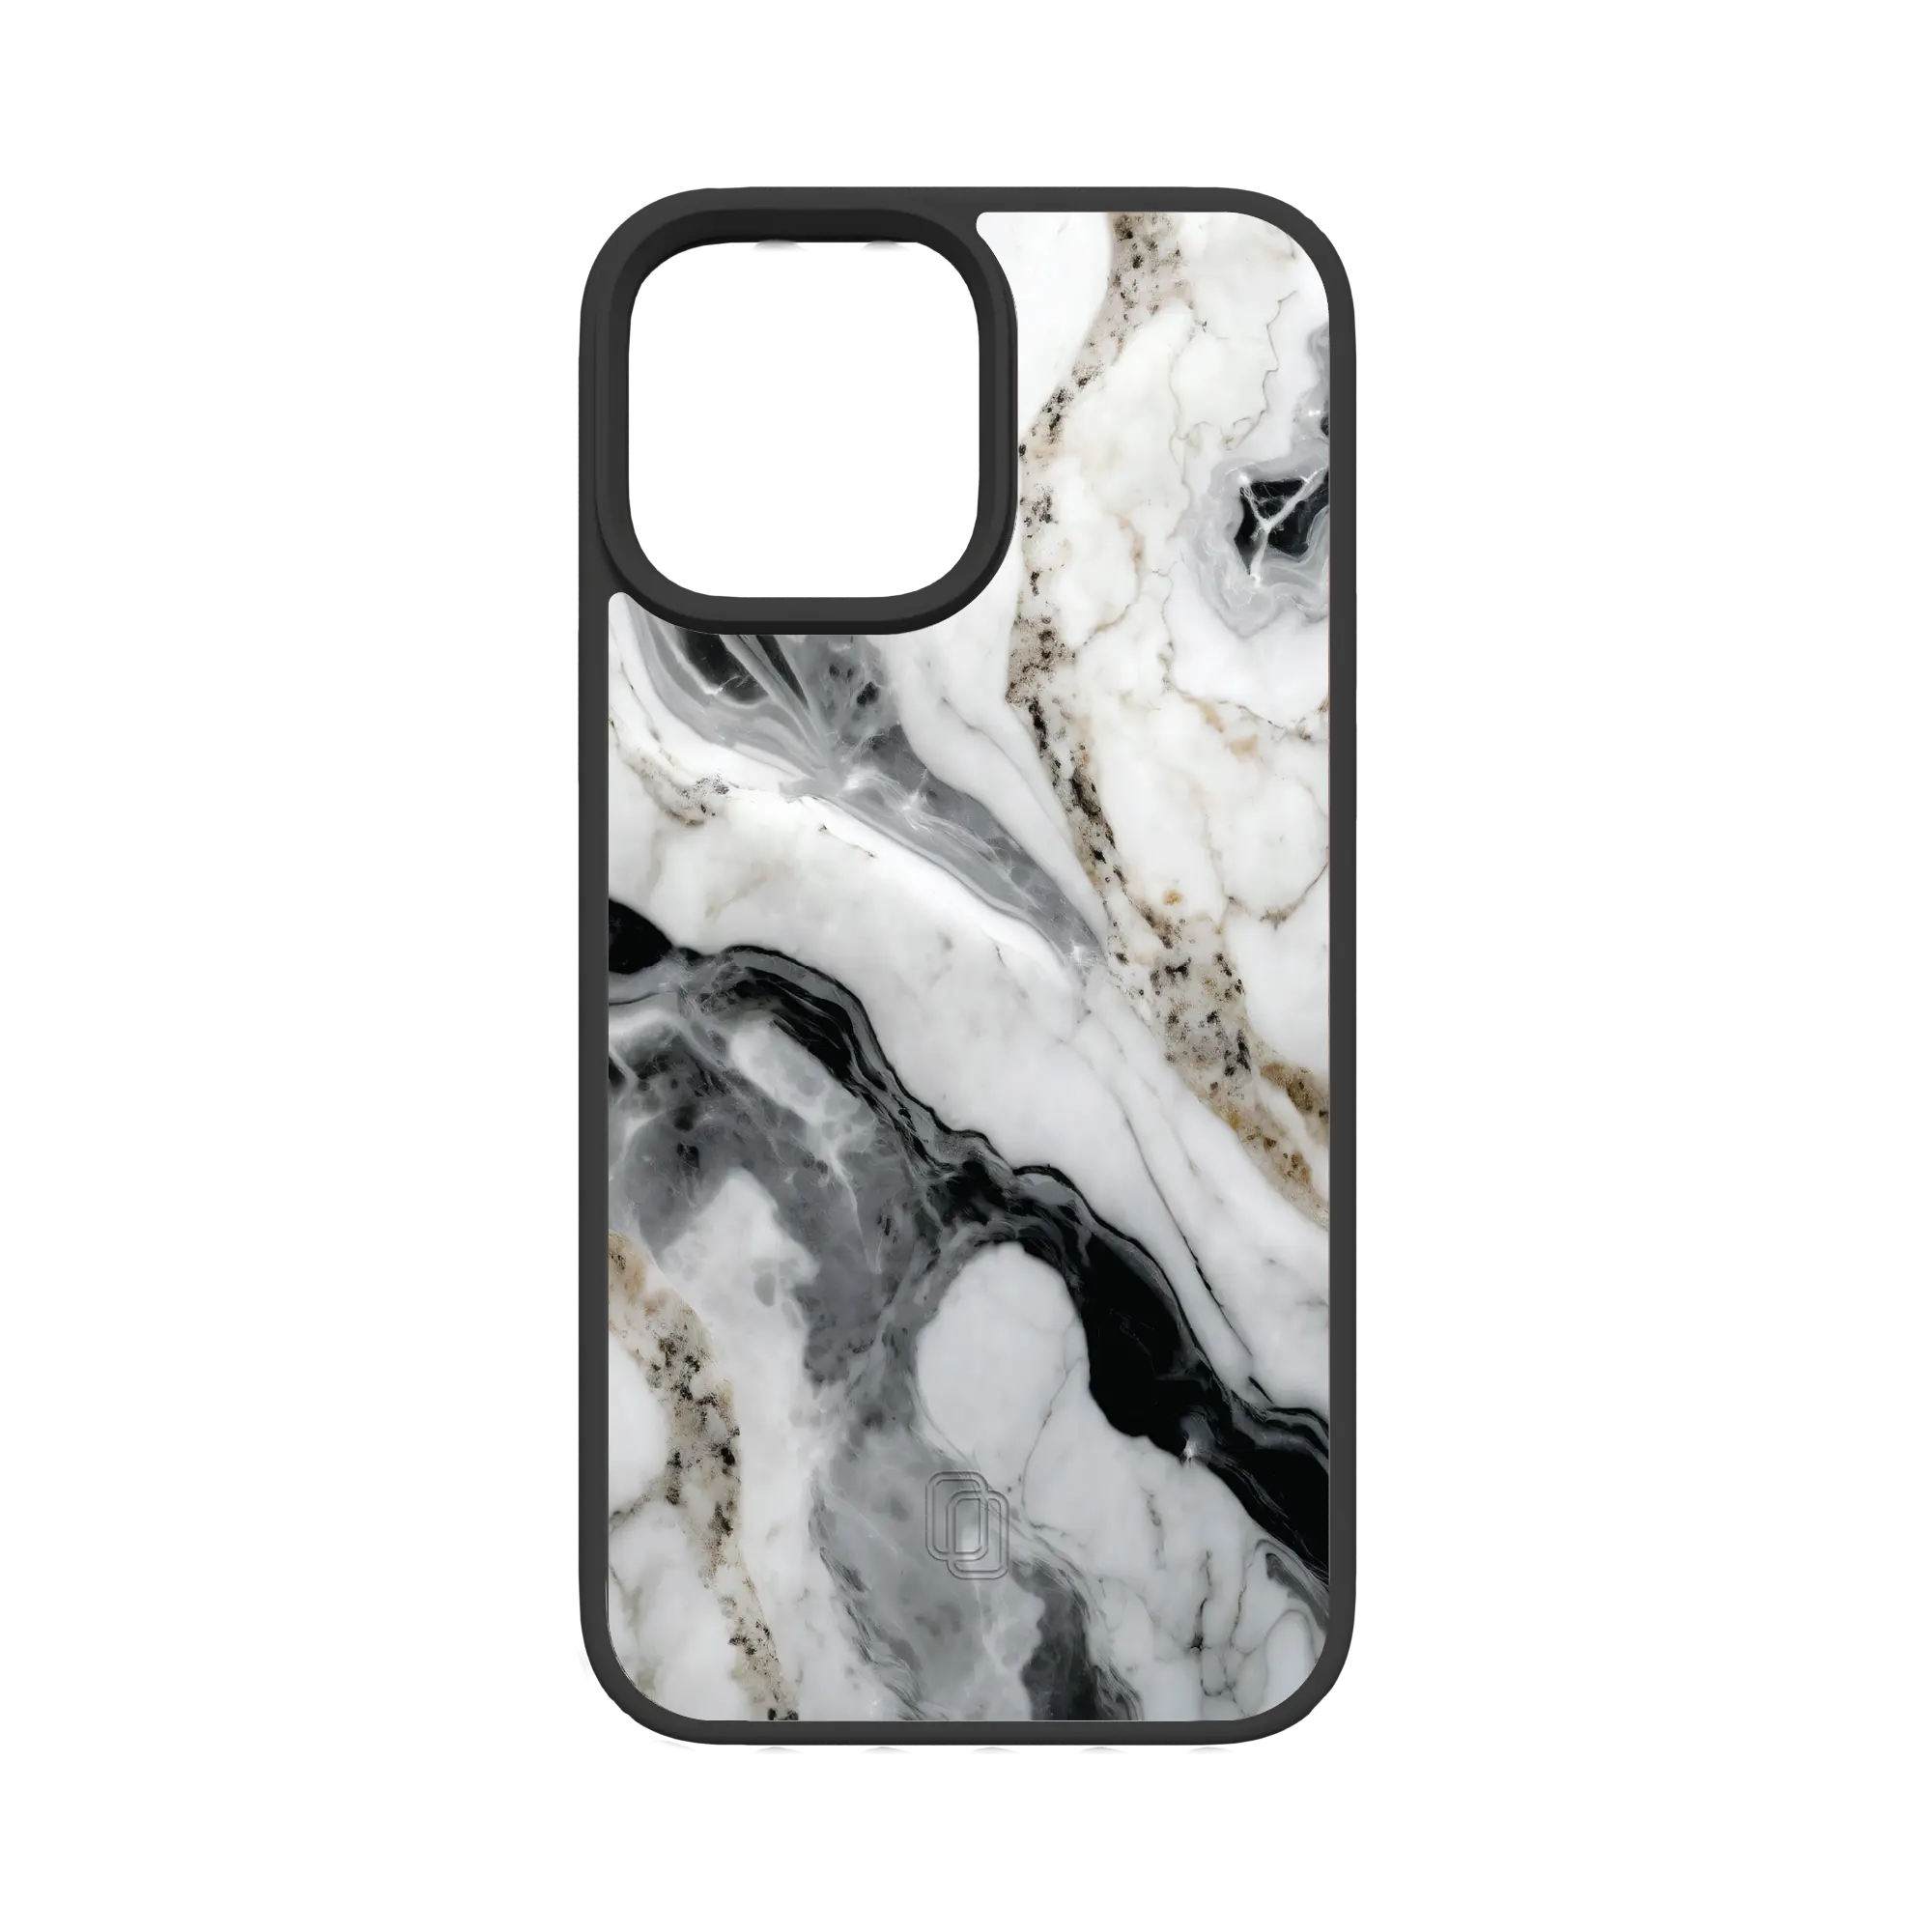 Apple-iPhone-12-12-Pro-Crystal-Clear Pure Snow | Protective MagSafe Case | Marble Stone Collection for Apple iPhone 12 Series cellhelmet cellhelmet